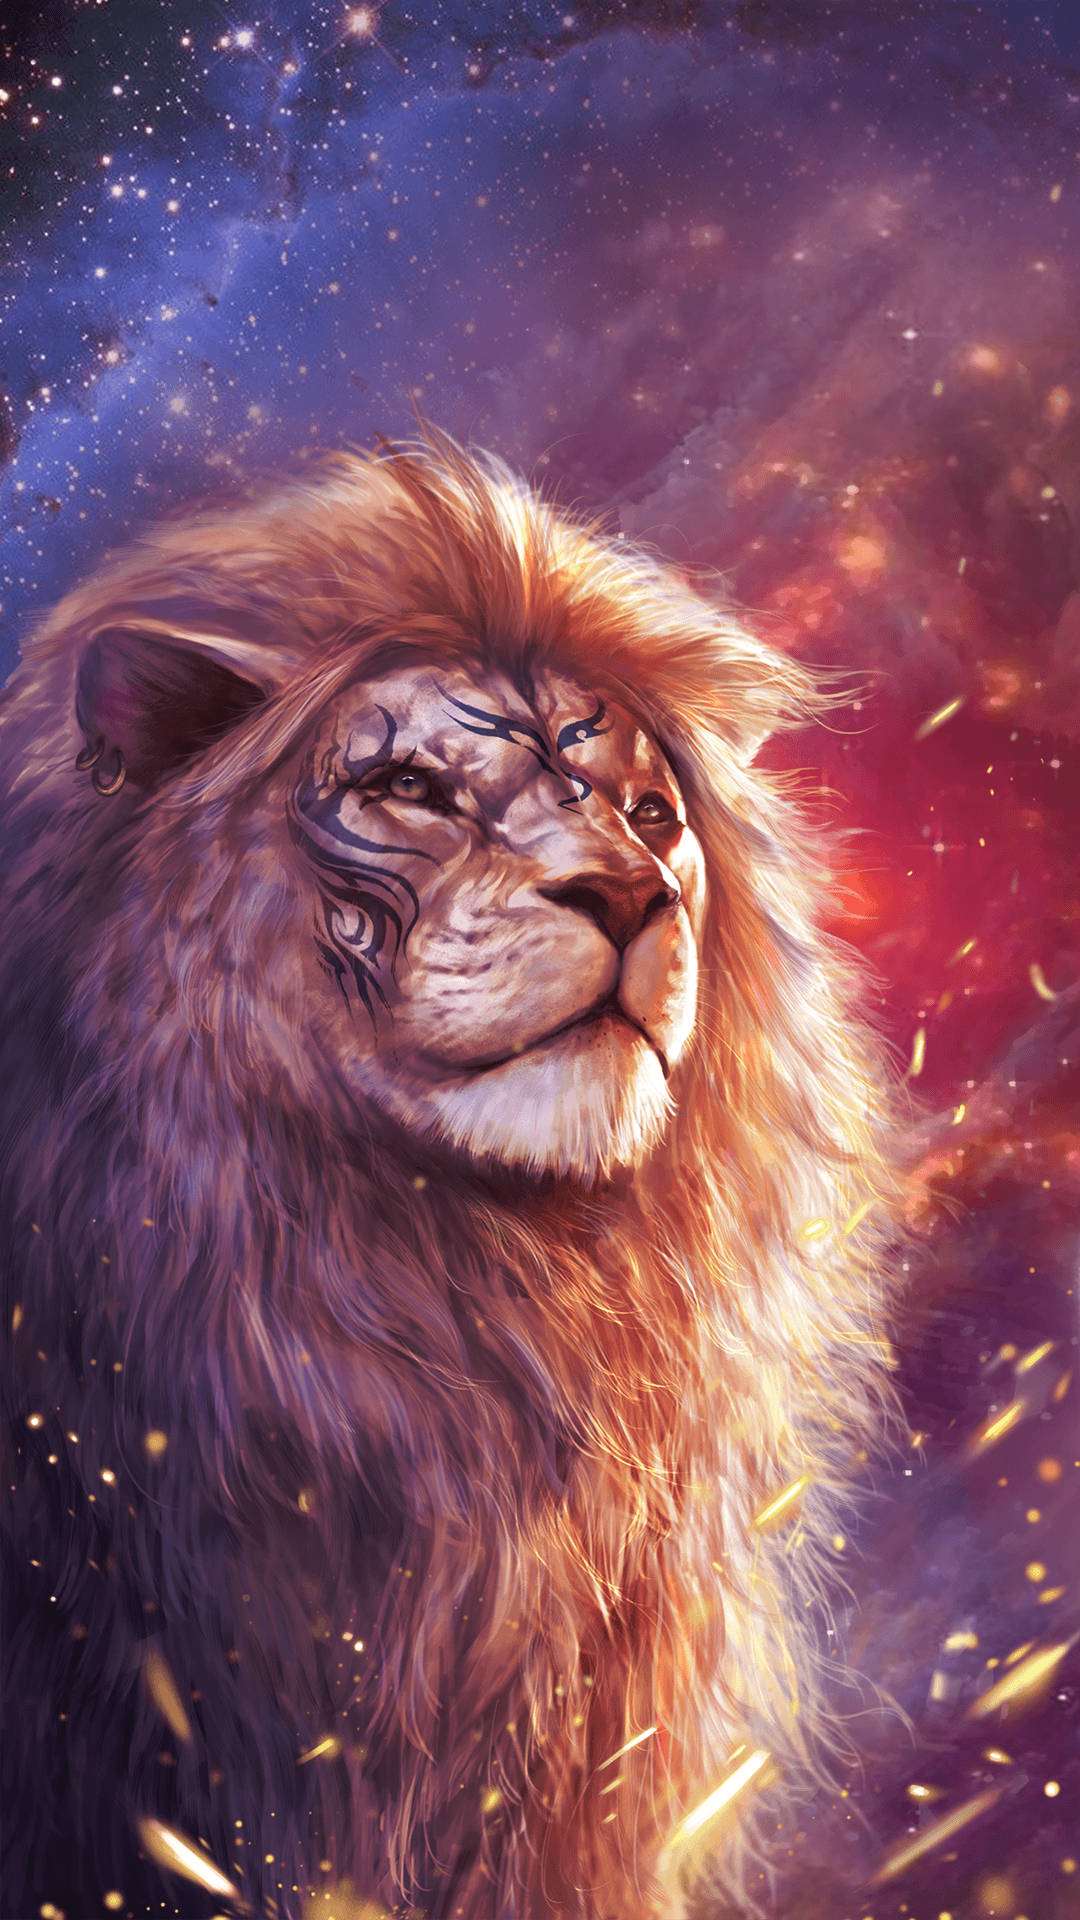 Aesthetic Face Tattoo Lion Iphone Background